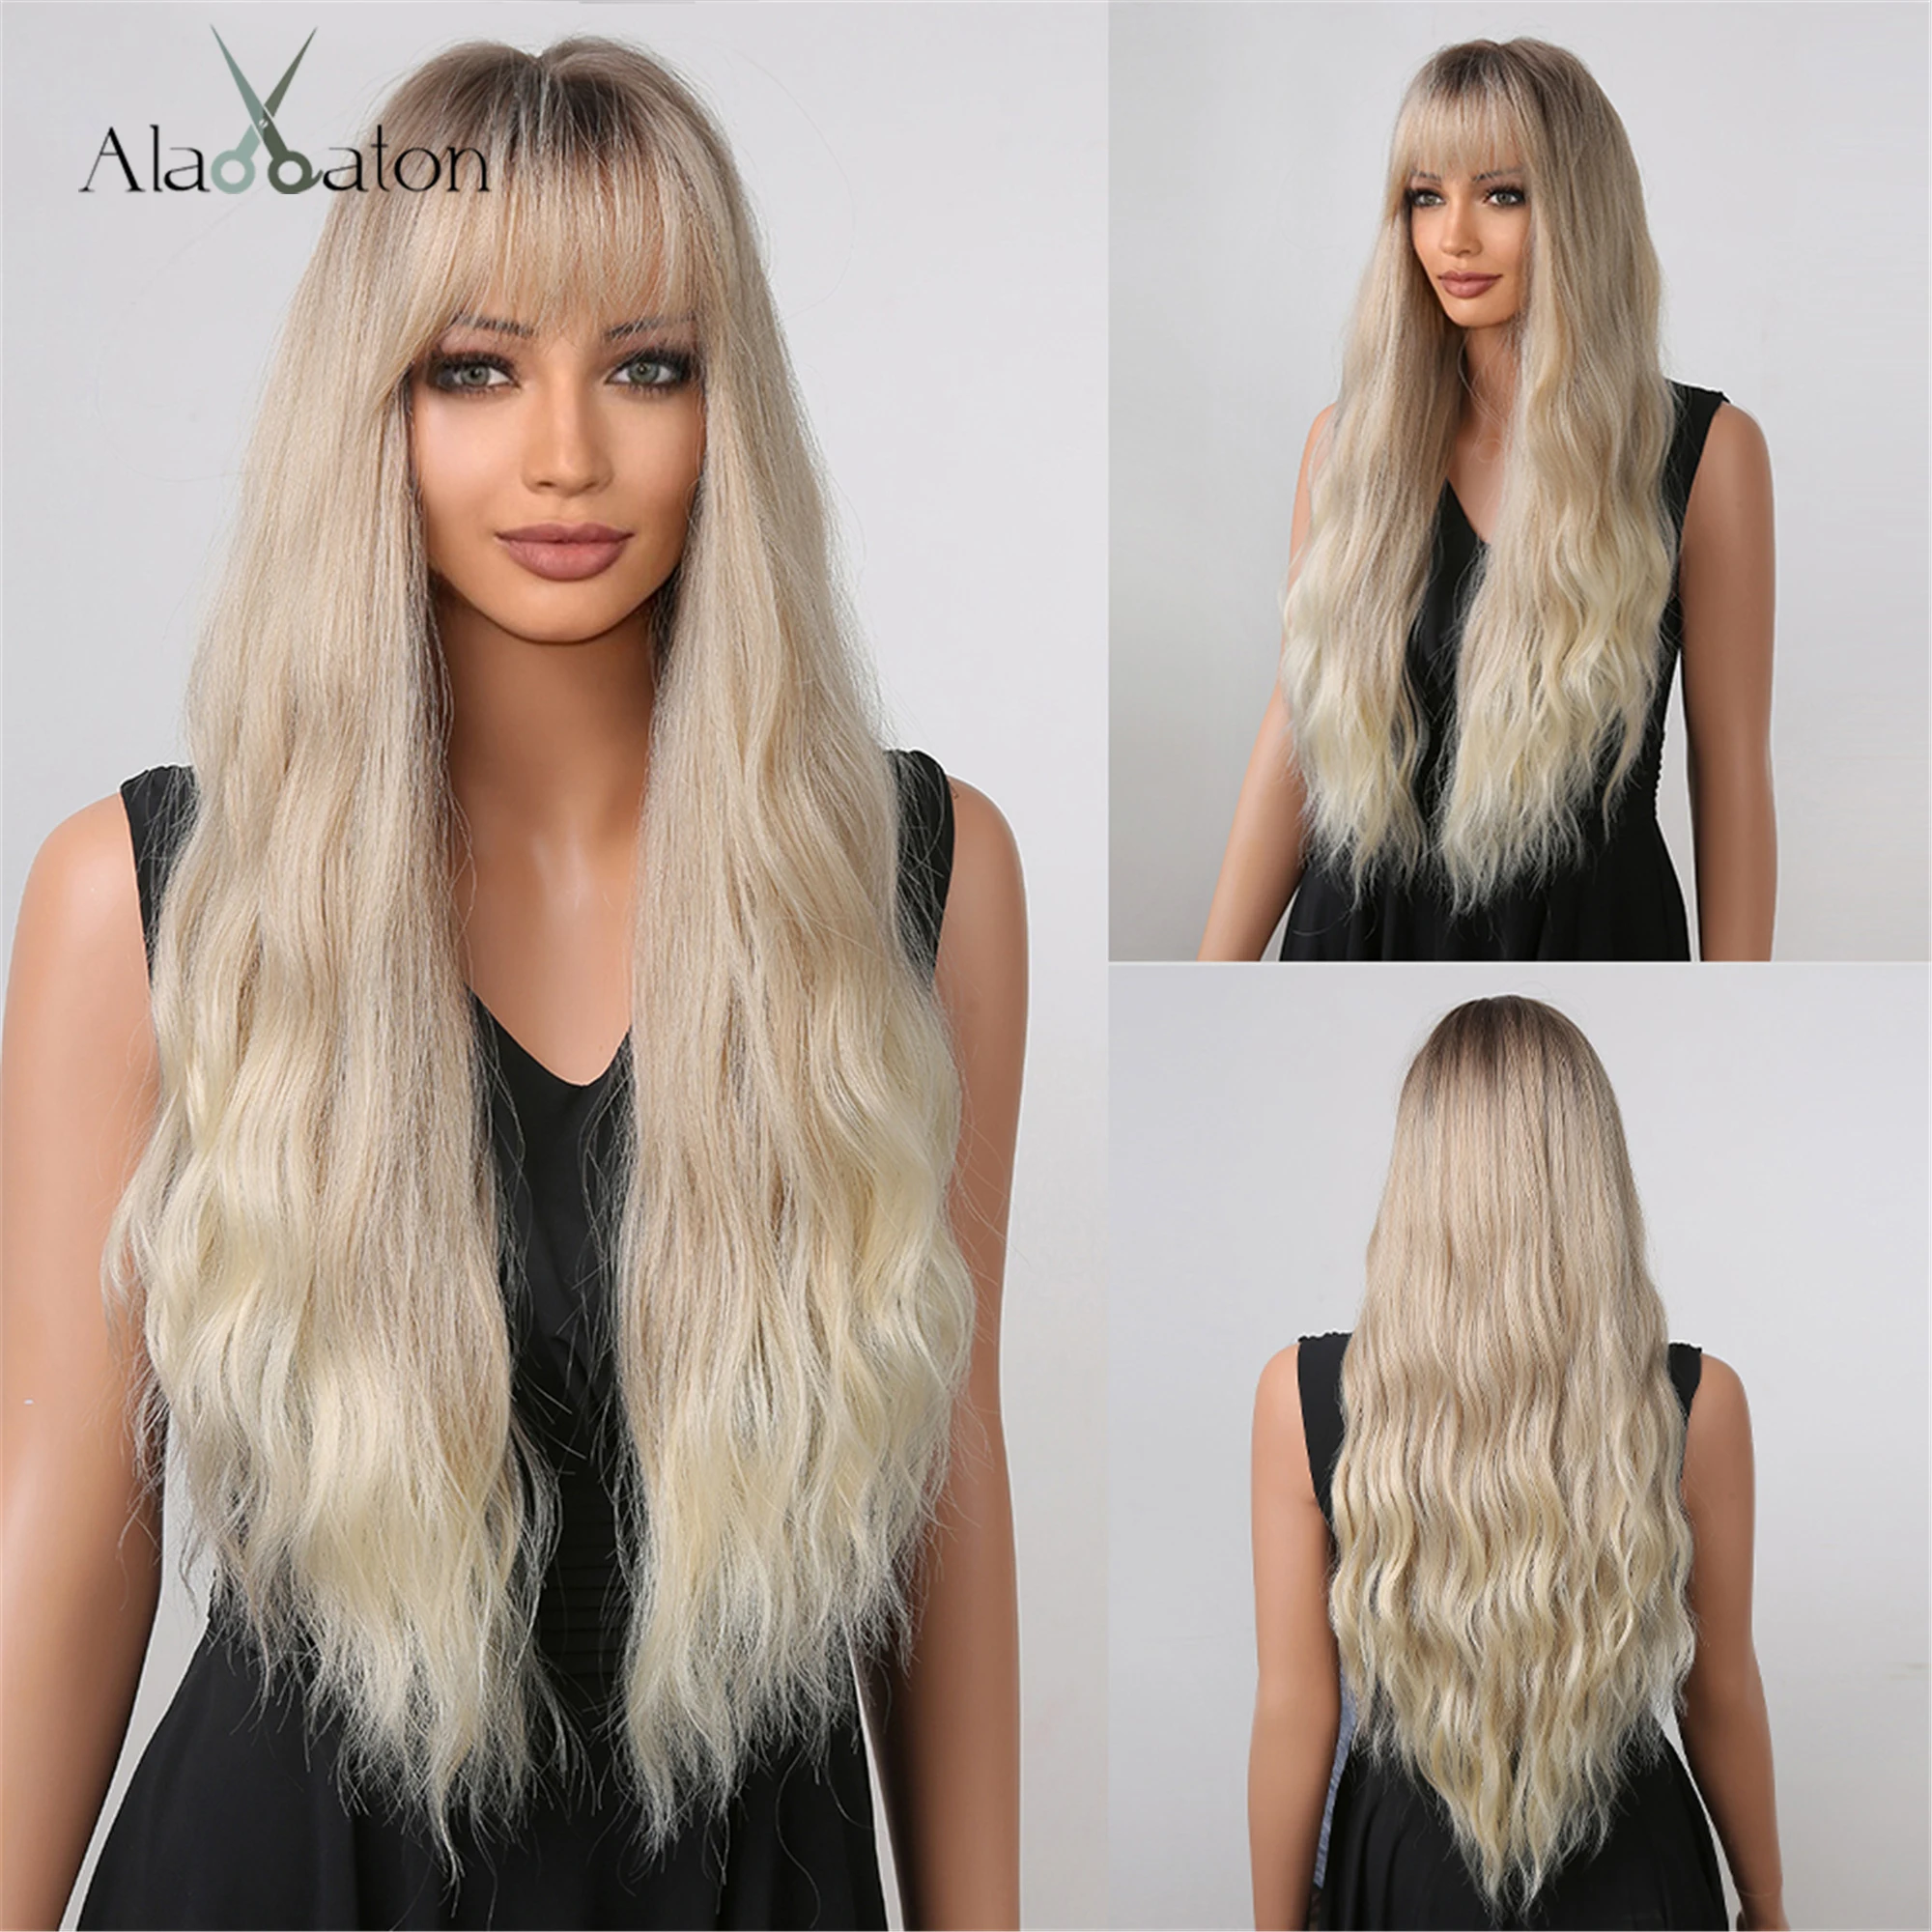 

ALAN EATON Brown to Platinum White Ombre Synthetic Wigs for Women Afro Long Wavy Wigs with Bangs Heat Resistant